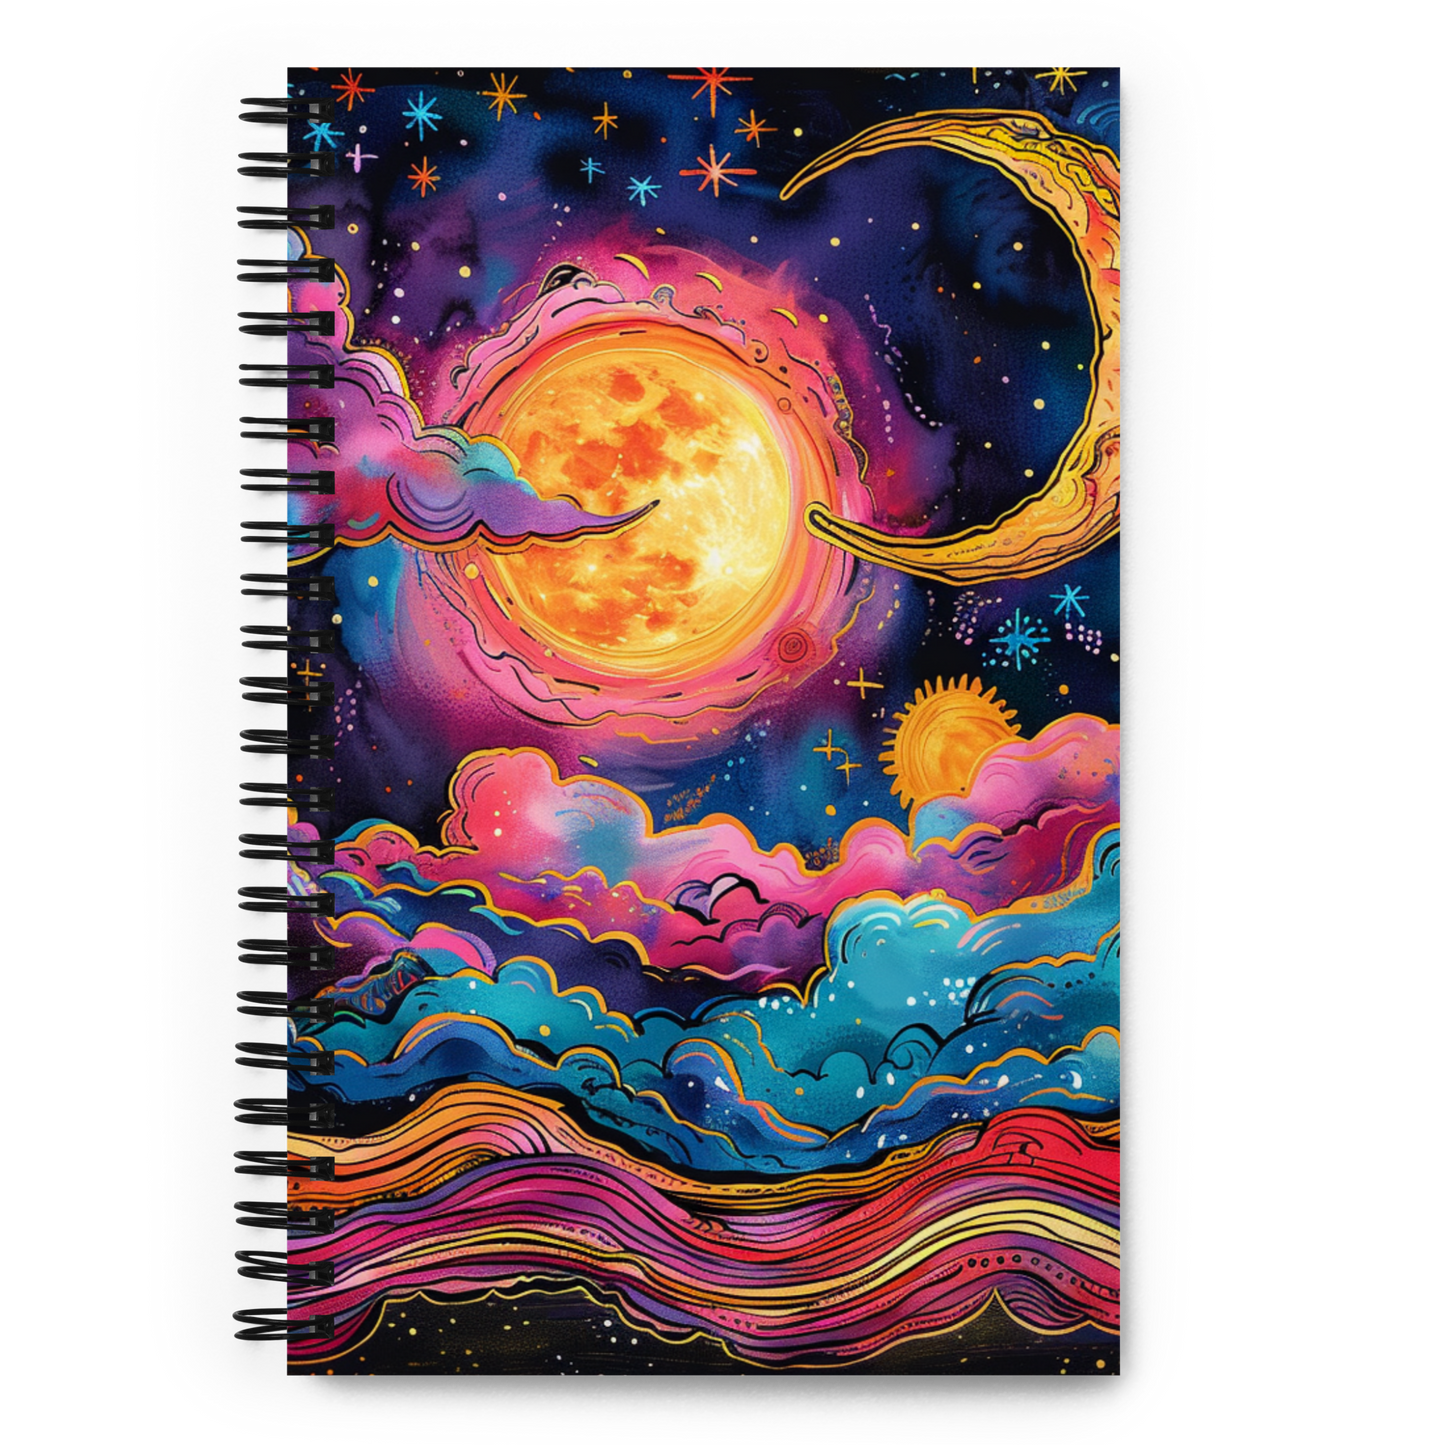 Celestial Moon Notepad - Capture Your Thoughts Under the Cosmic Sky